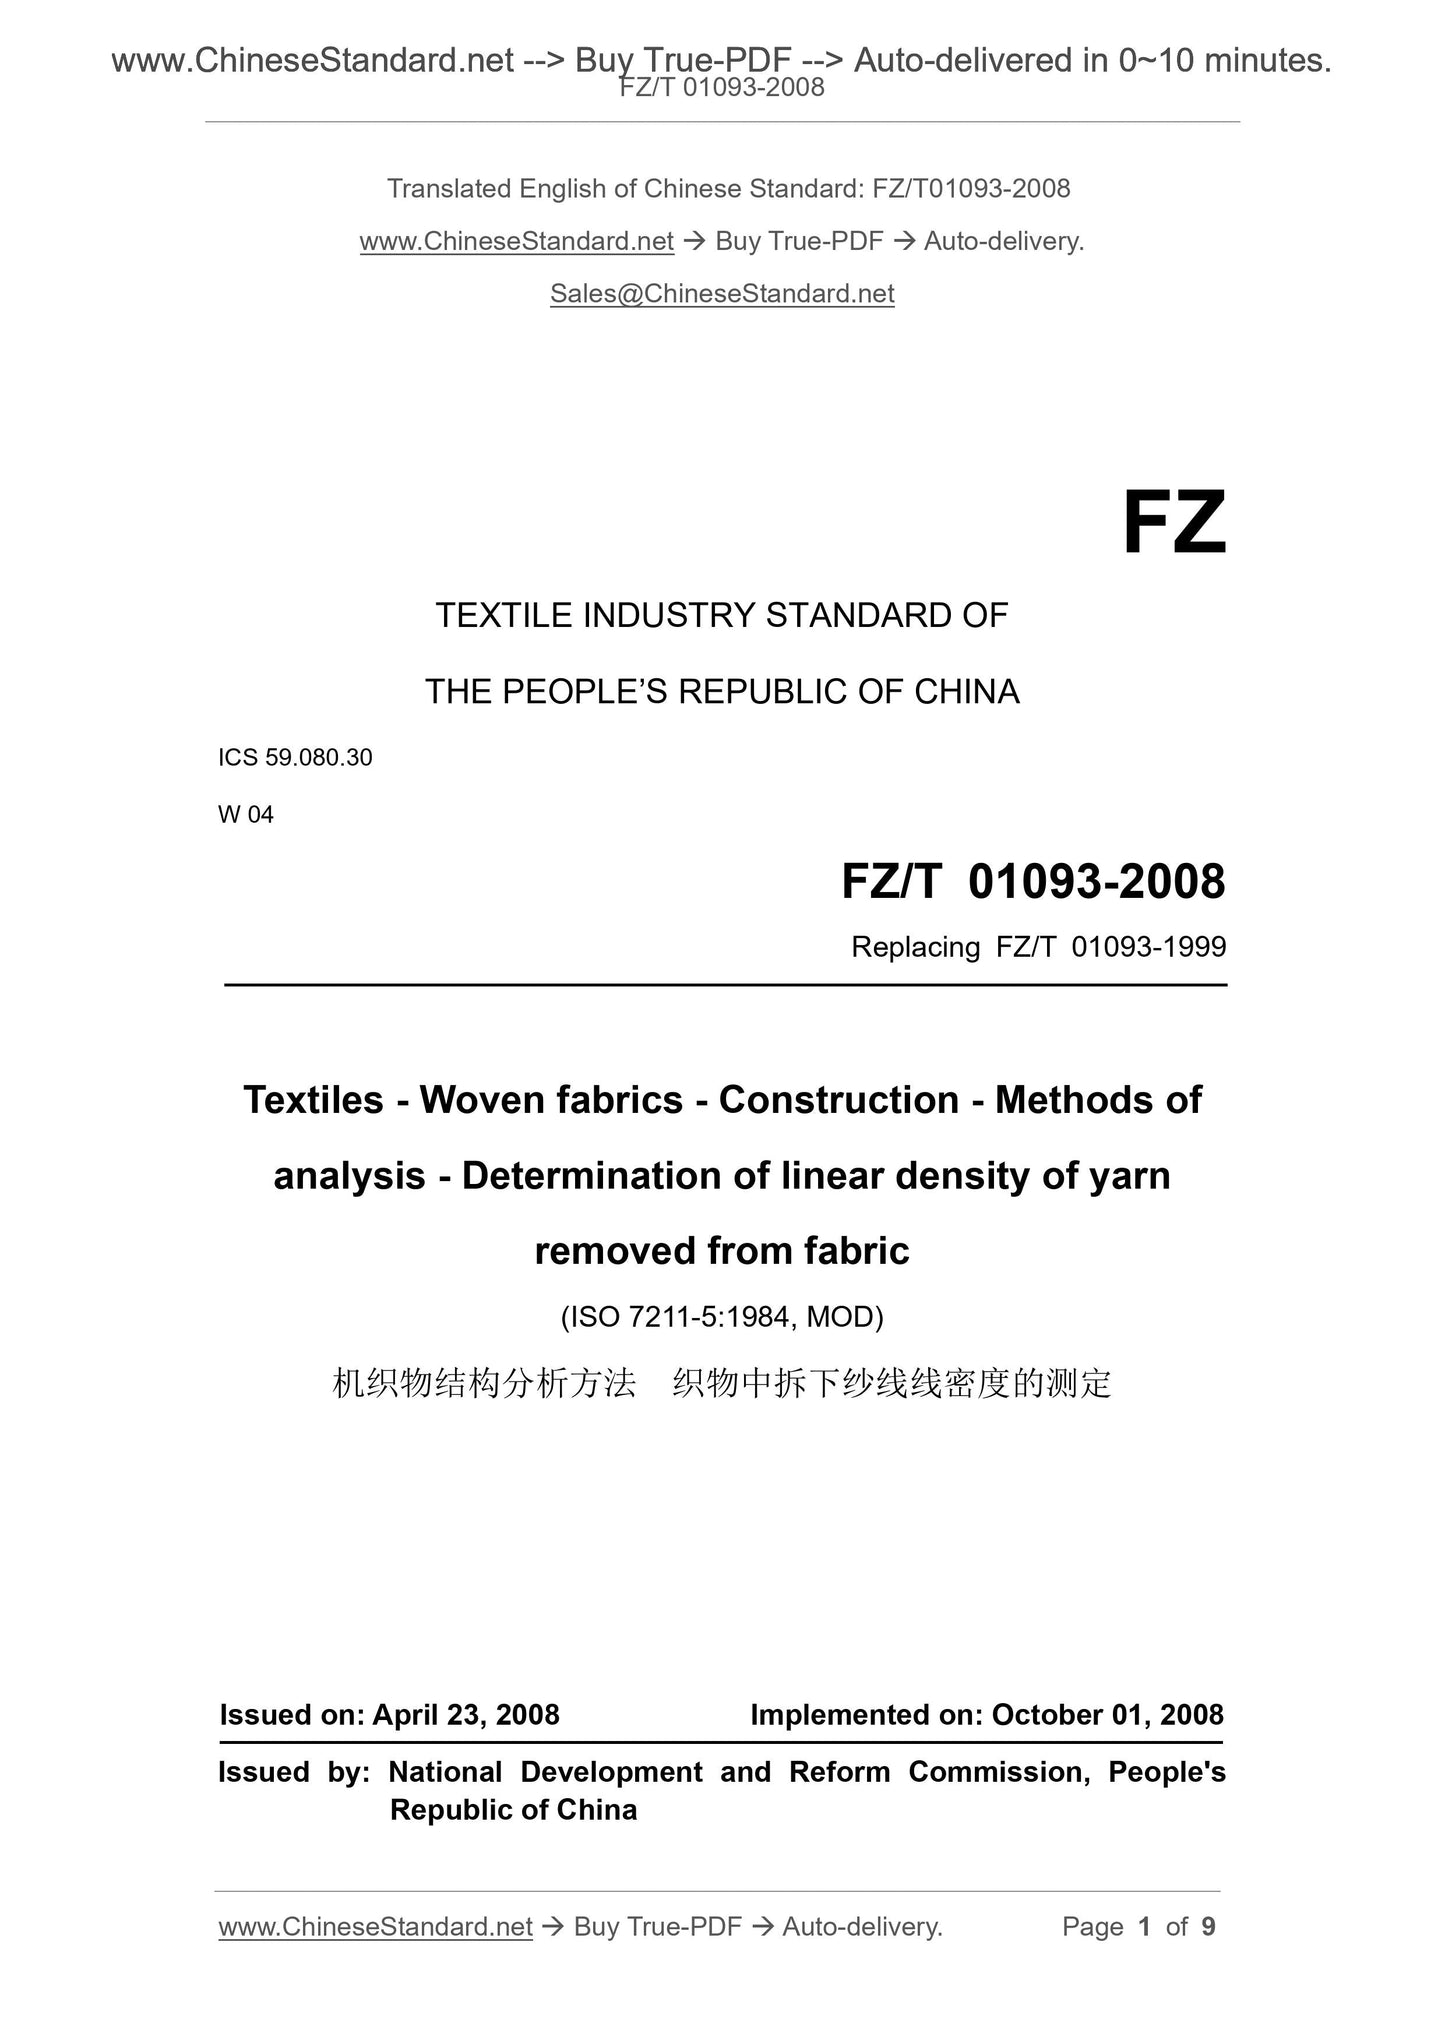 FZ/T 01093-2008 Page 1